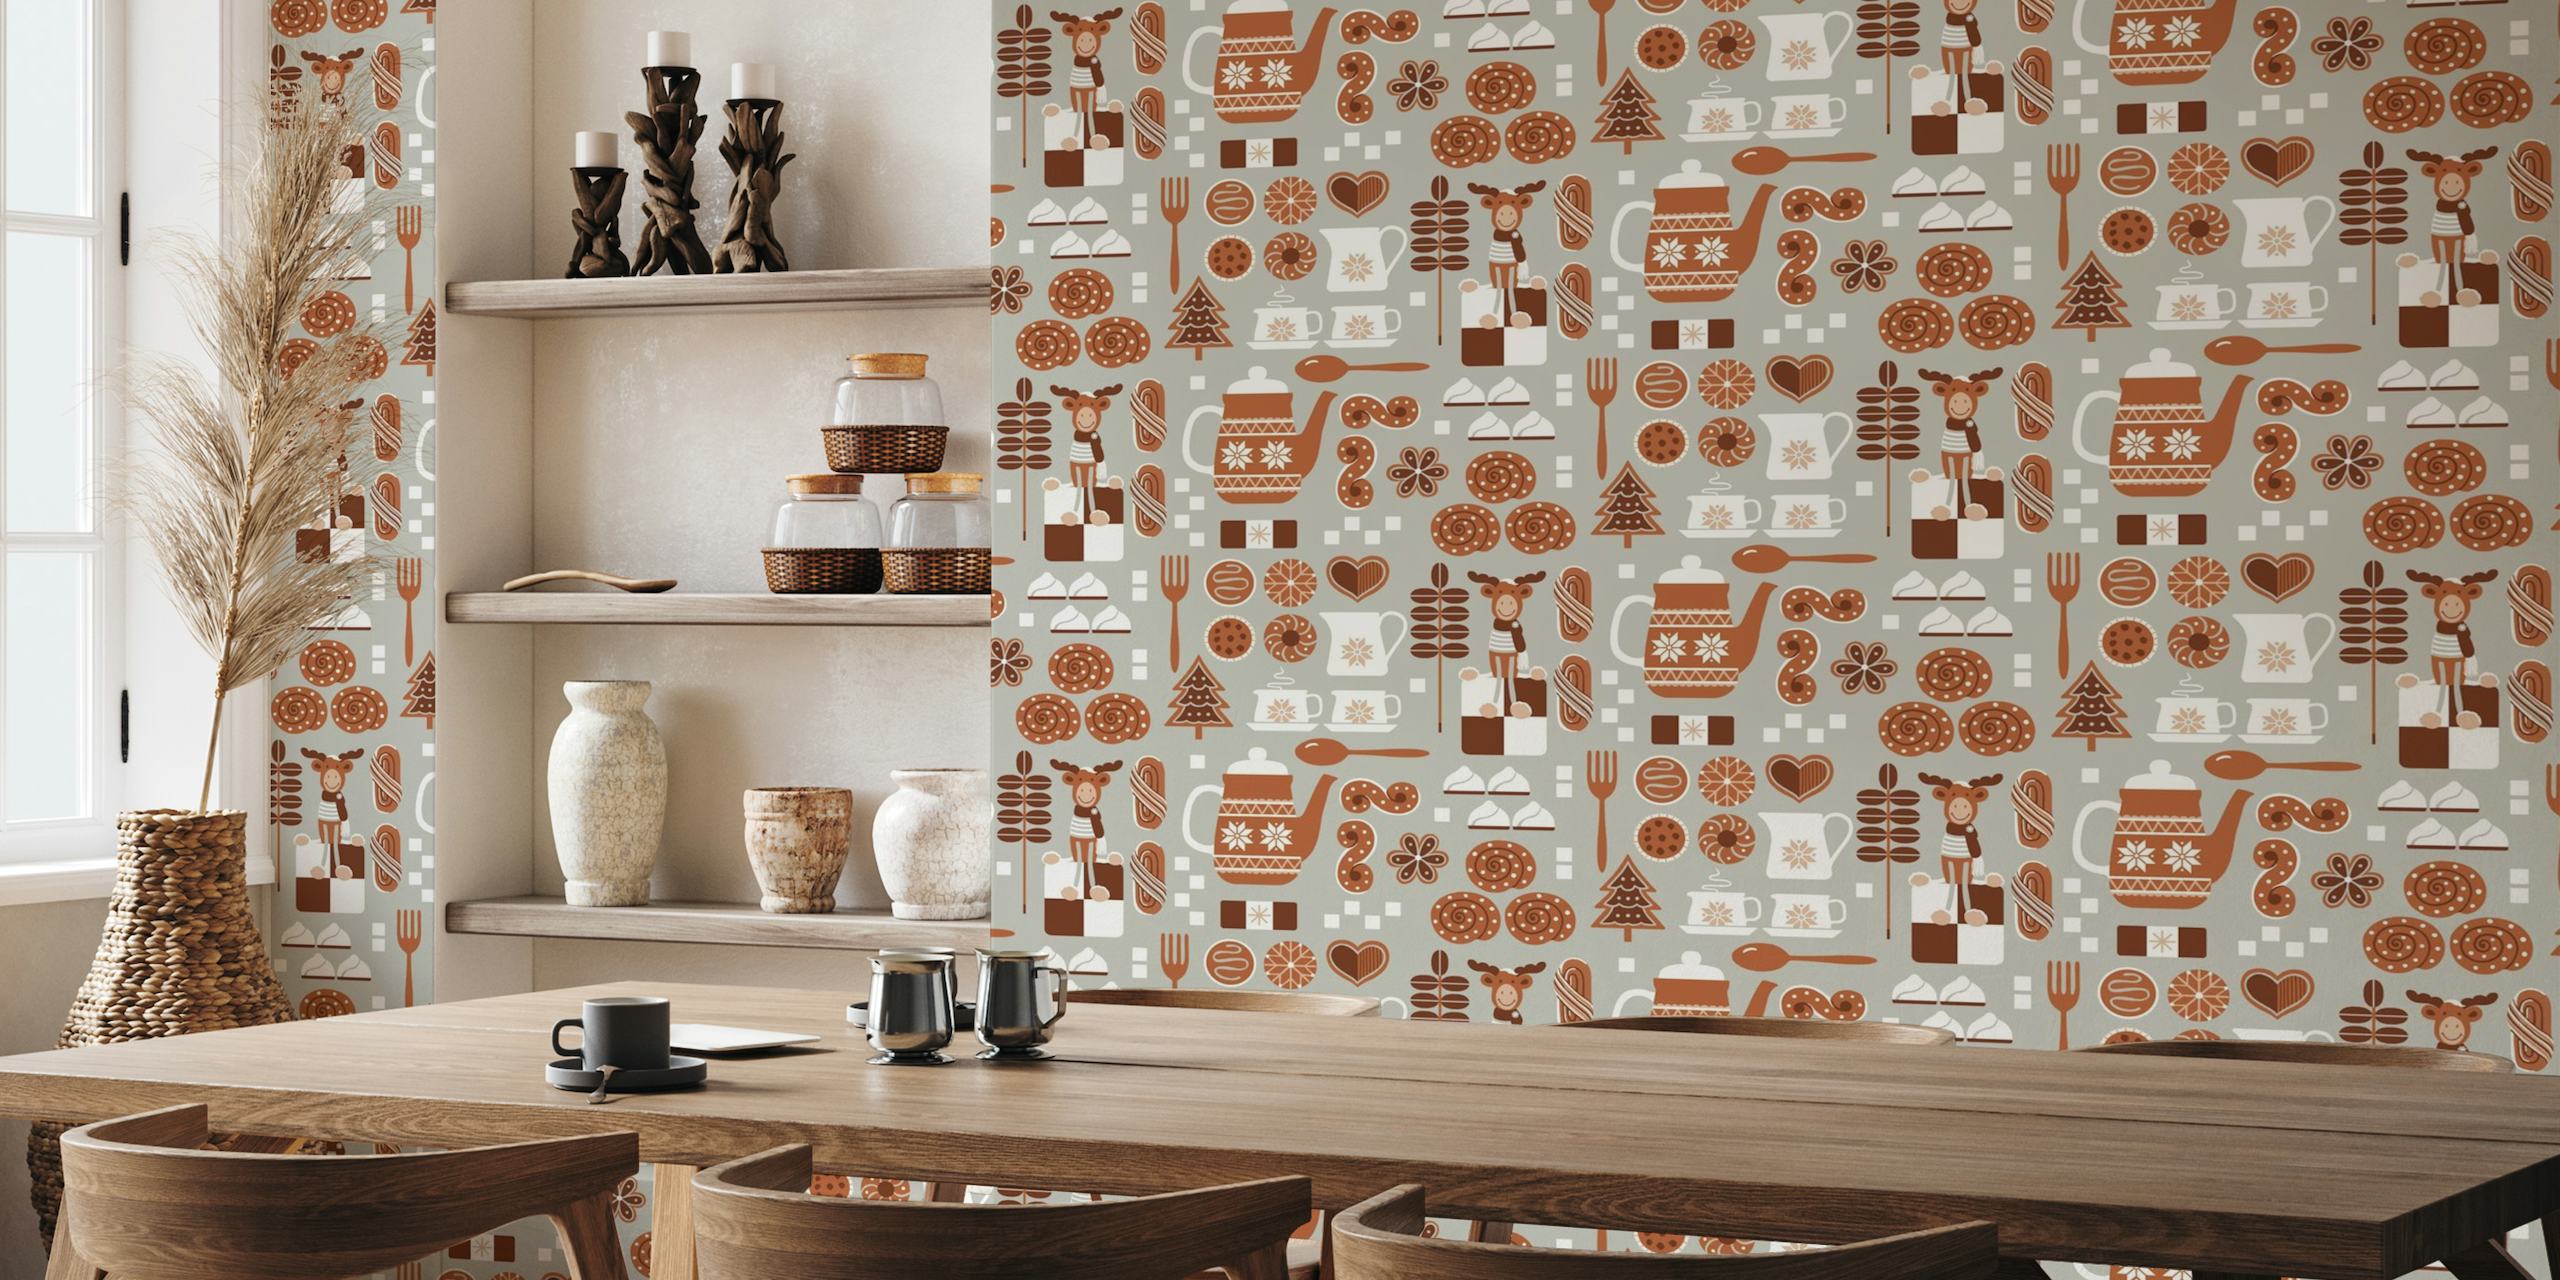 Scandinavian-style Holiday Fika wall mural with teapots, cookies, and woodland animals in gray tones